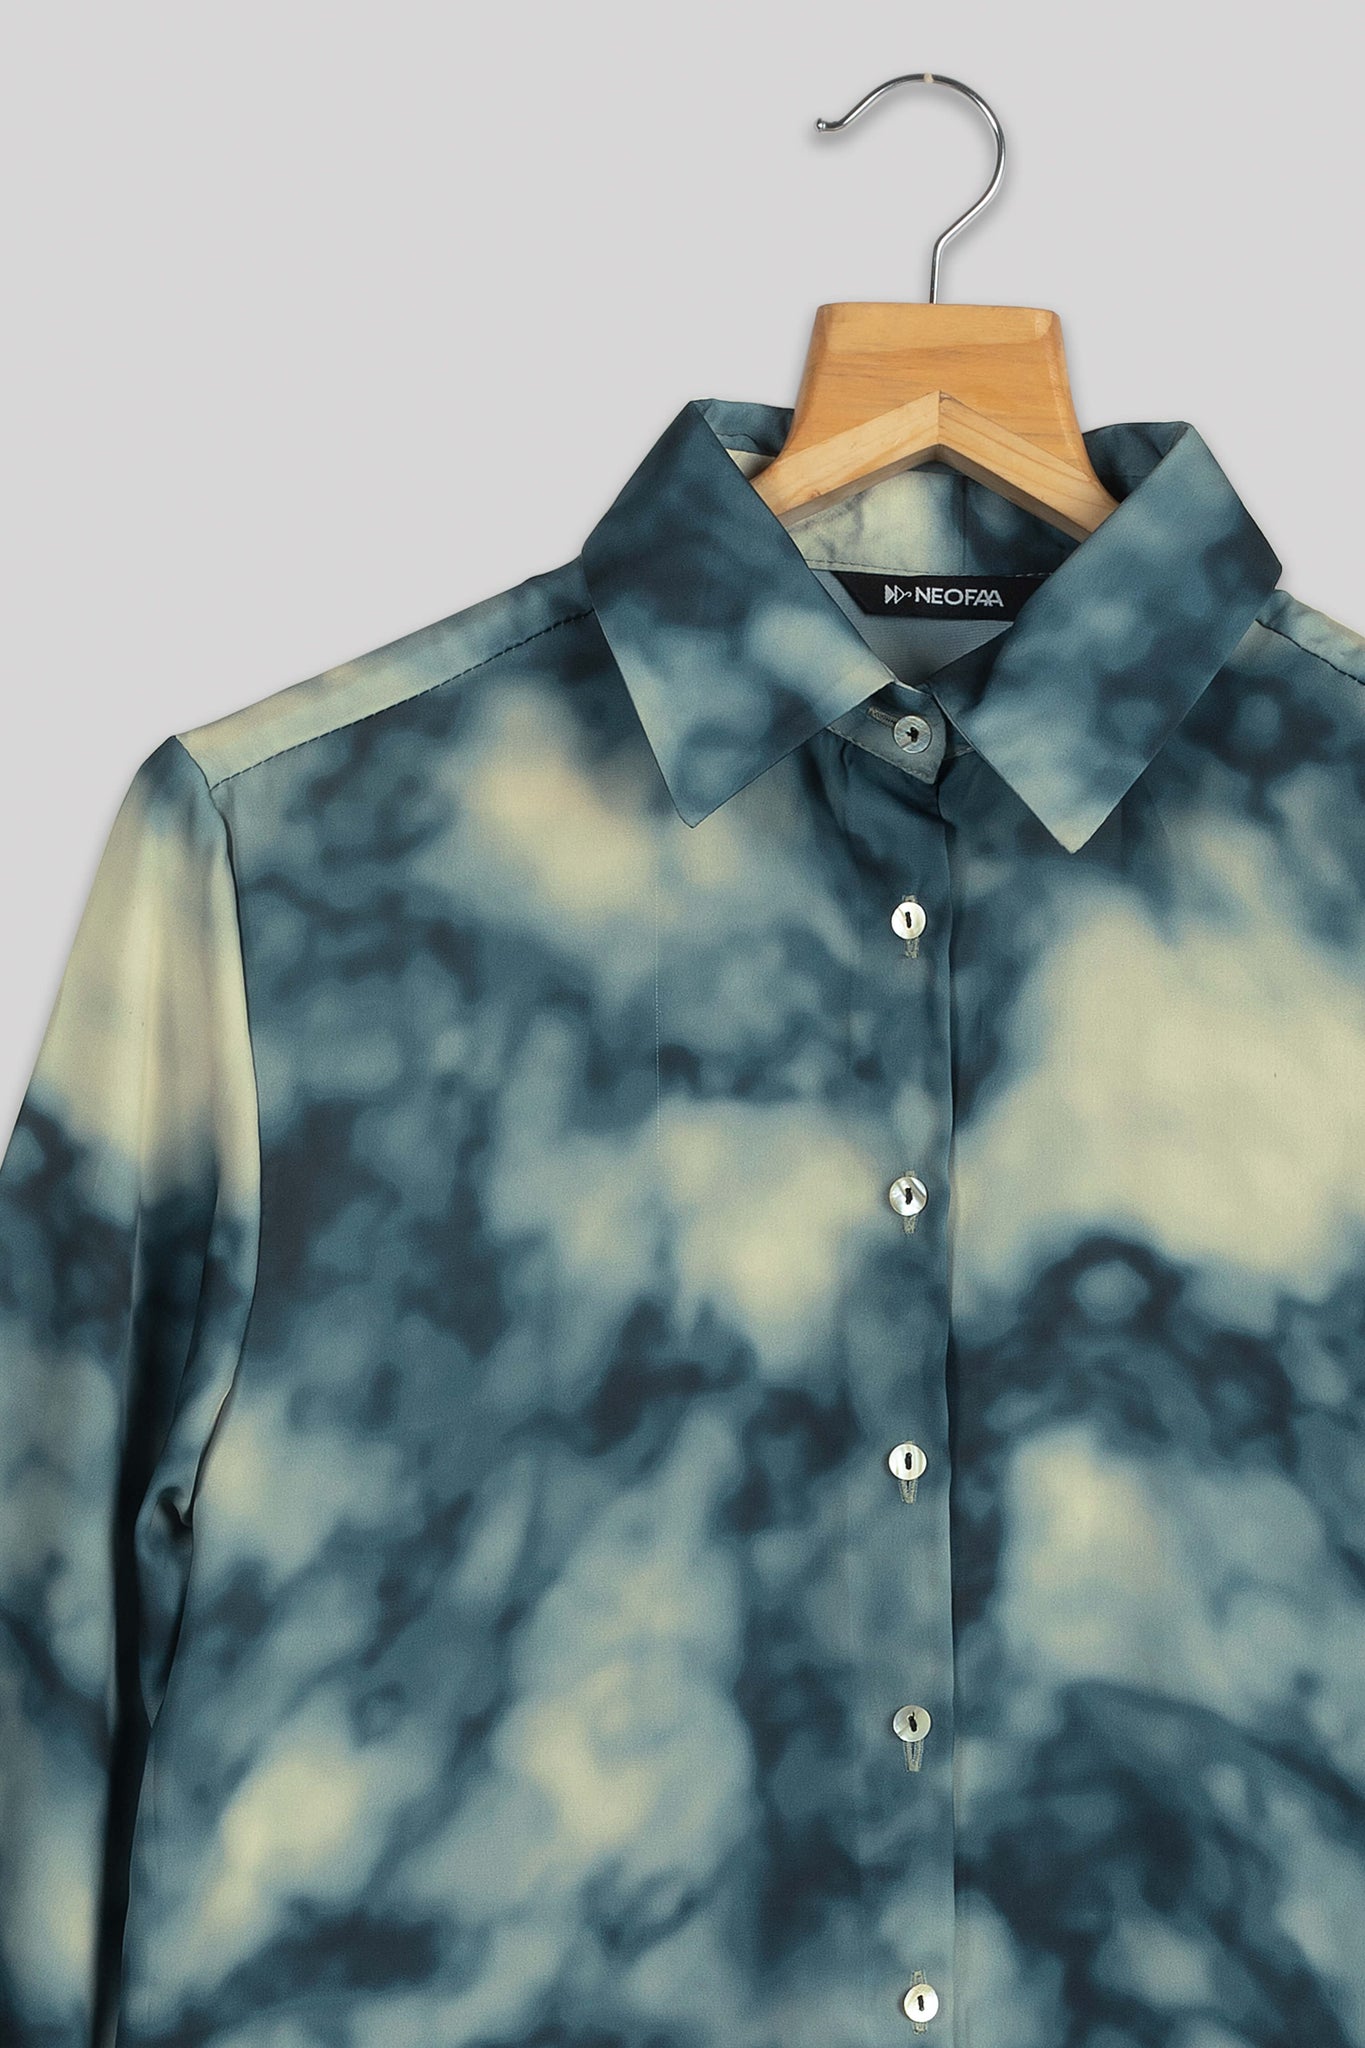 Trendy Tie And Dye Shirt For Women